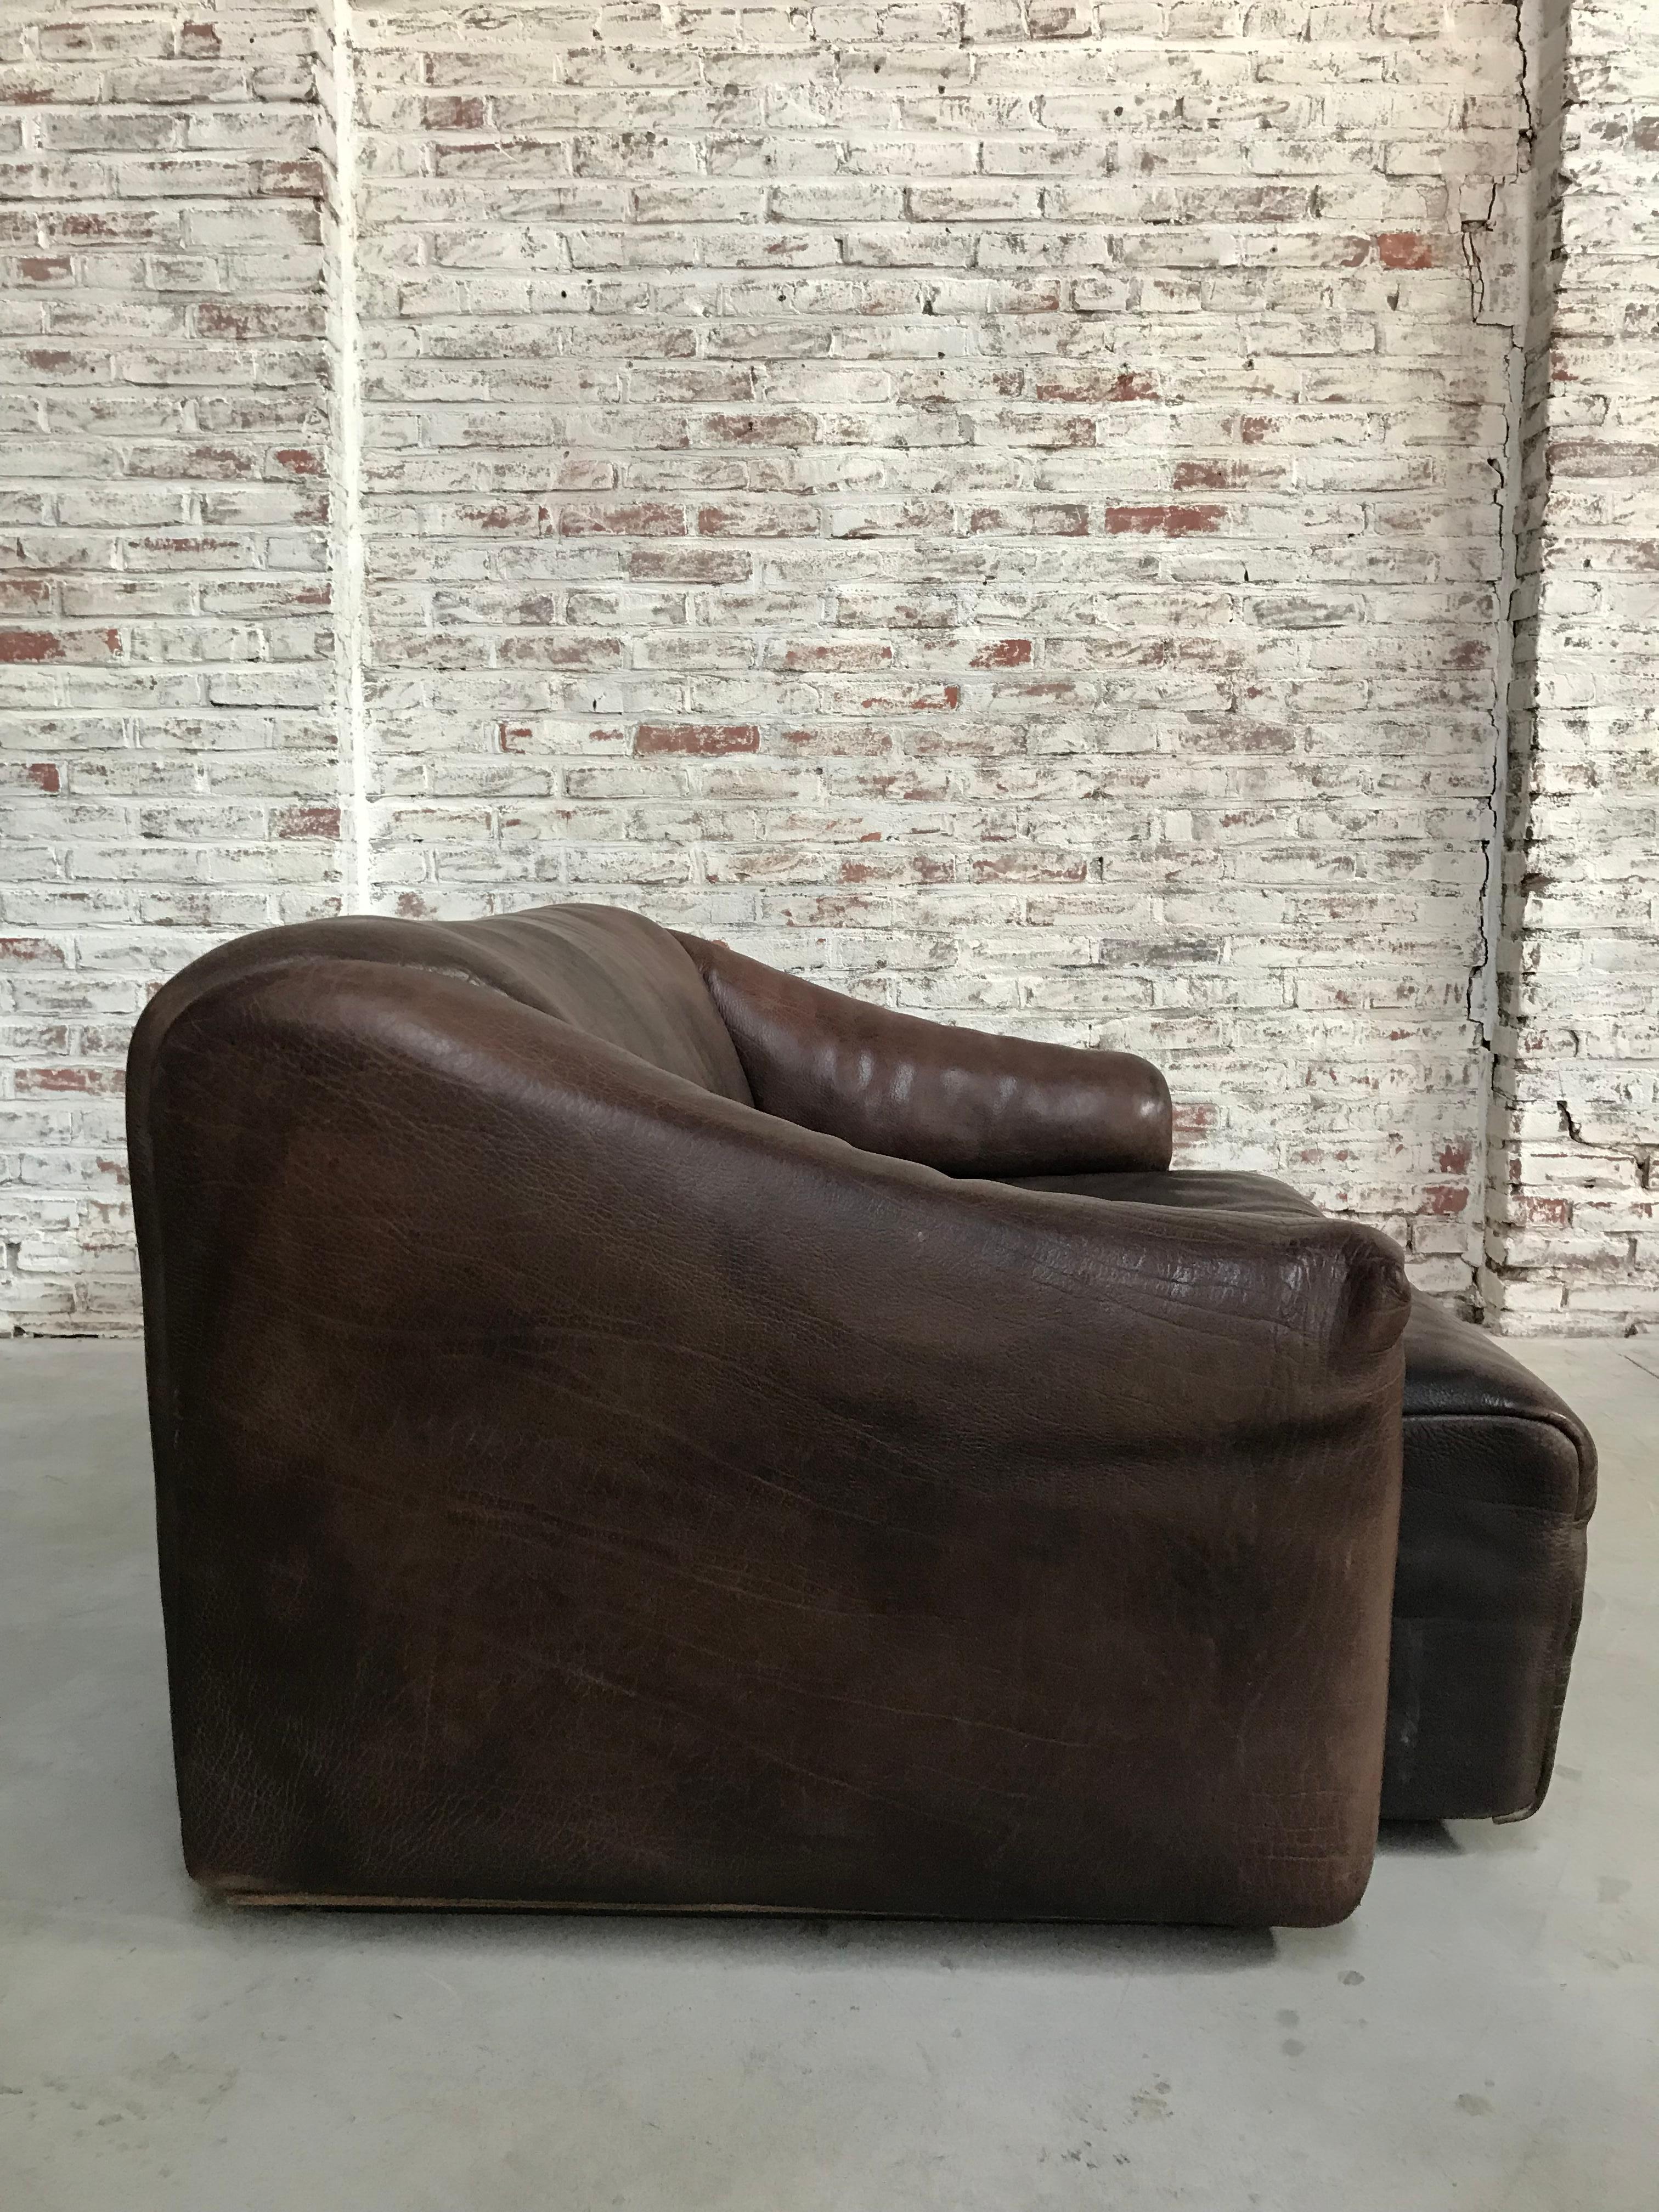 Midcentury Swiss De Sede Ds-47 Two-Seat in Chocolat Neck Leather, 1970s For Sale 1